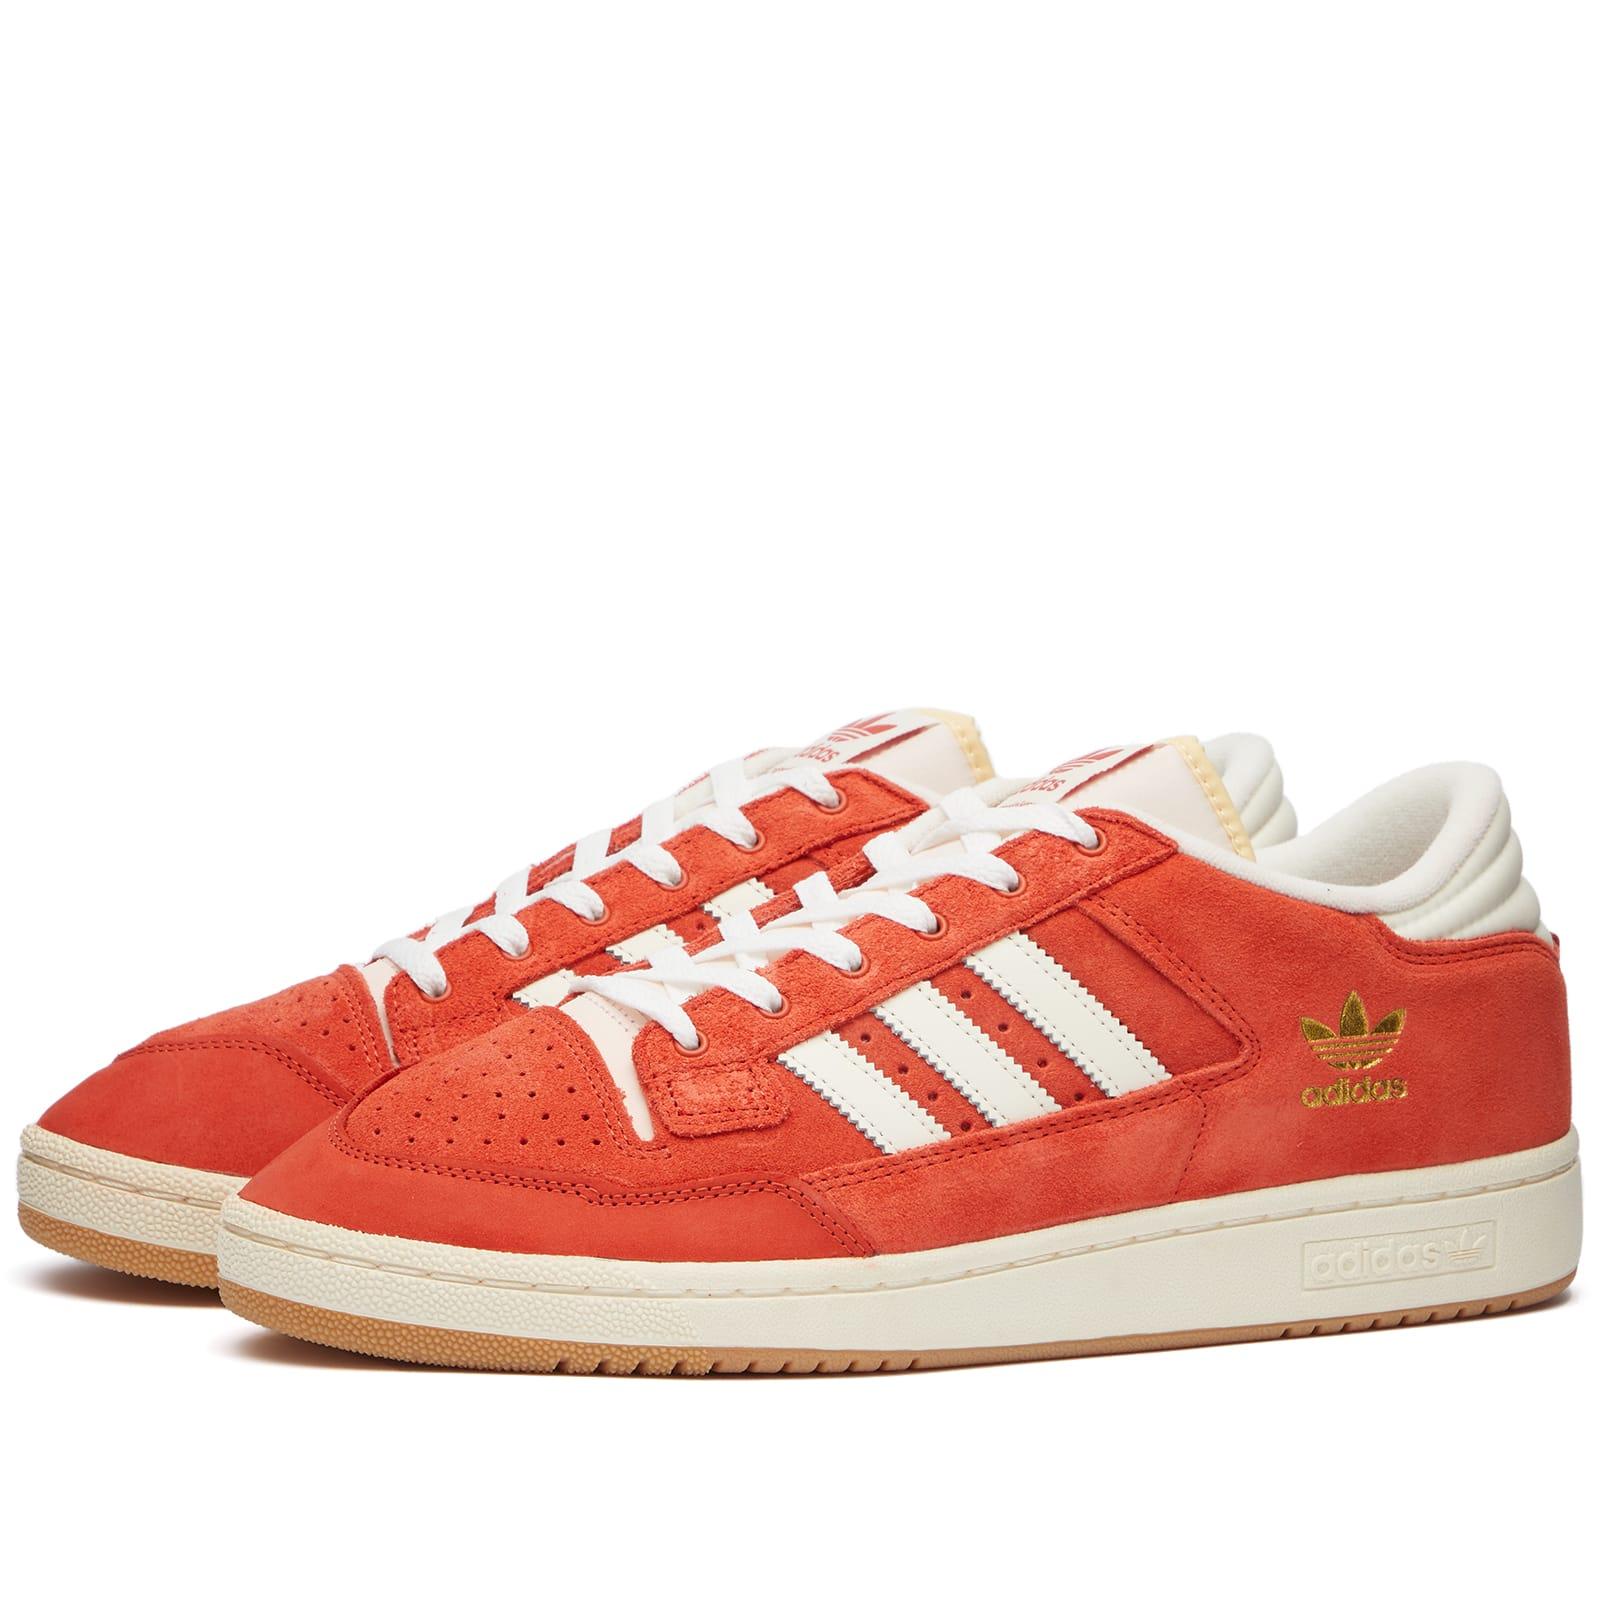 adidas Centennial 85 Lo Sneakers in Red | Lyst